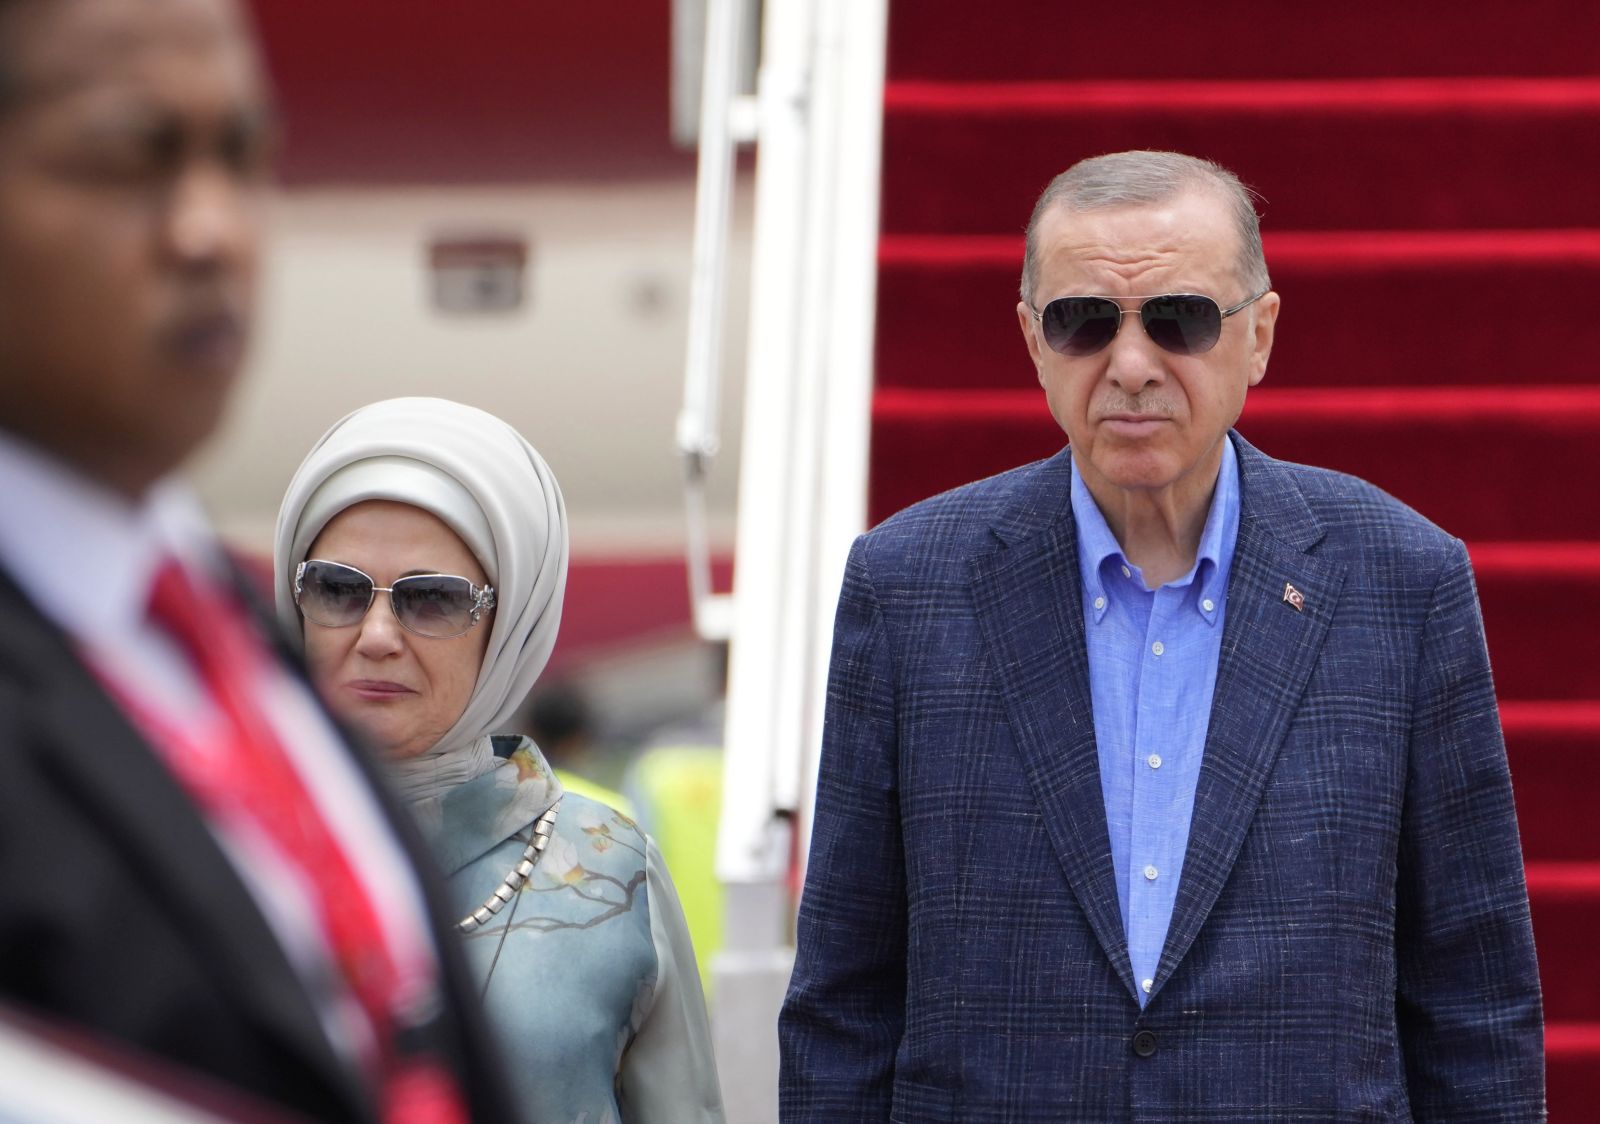 epa10304895 Turkish President Recep Tayyip Erdogan (C) and his wife Emine (2-L) disembark from their plane as they arrive at Ngurah Rai International Airport ahead of the G20 Summit in Bali, Indonesia,14 November 2022. The 17th Group of Twenty (G20) Heads of State and Government Summit will be held in Bali from 15 to 16 November 2022.  EPA/FIRDIA LISNAWATI / POOL